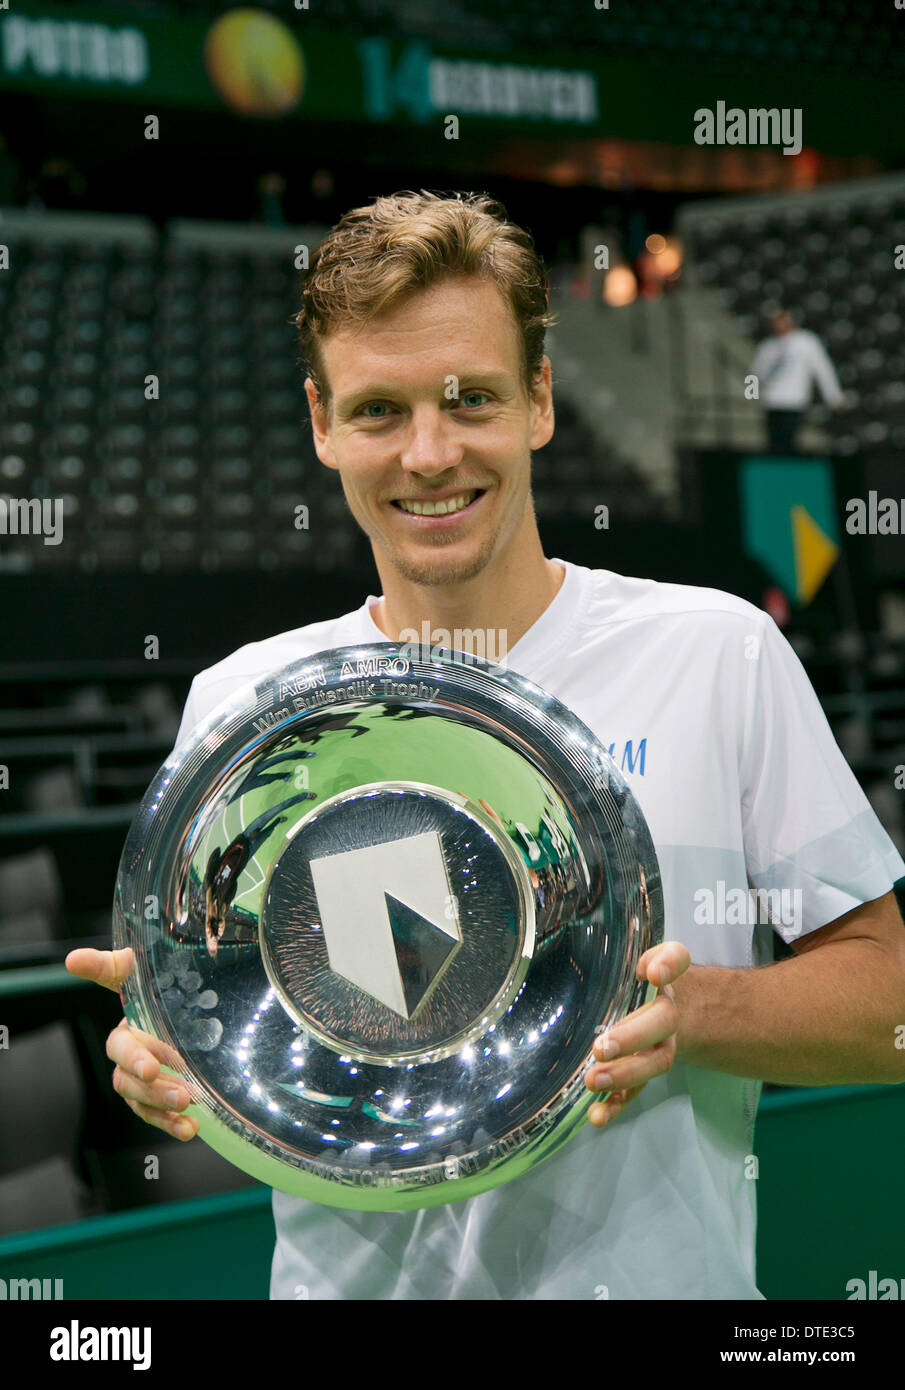 Rotterdam, The Netherlands. 16.02.2014. Tomas Berdych(TSJ) defeats Marin  Cilic(KRO) and wins the ABN AMRO World tennis Tournament of 2014  Photo:Tennisimages/Henk Koster Stock Photo - Alamy